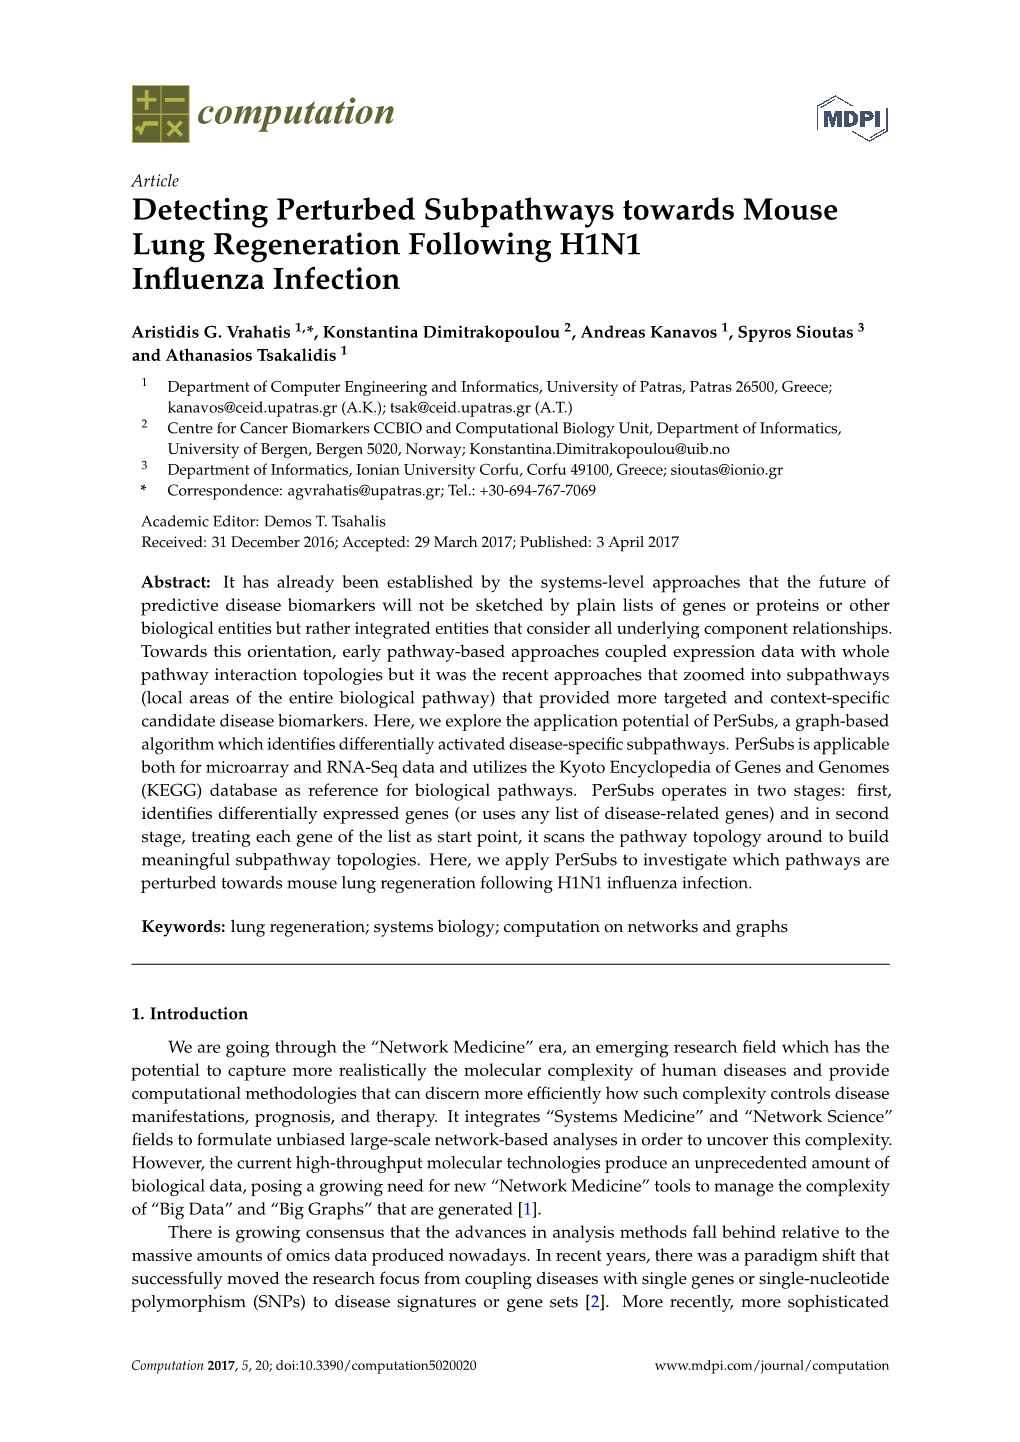 Detecting Perturbed Subpathways Towards Mouse Lung Regeneration Following H1N1 Inﬂuenza Infection